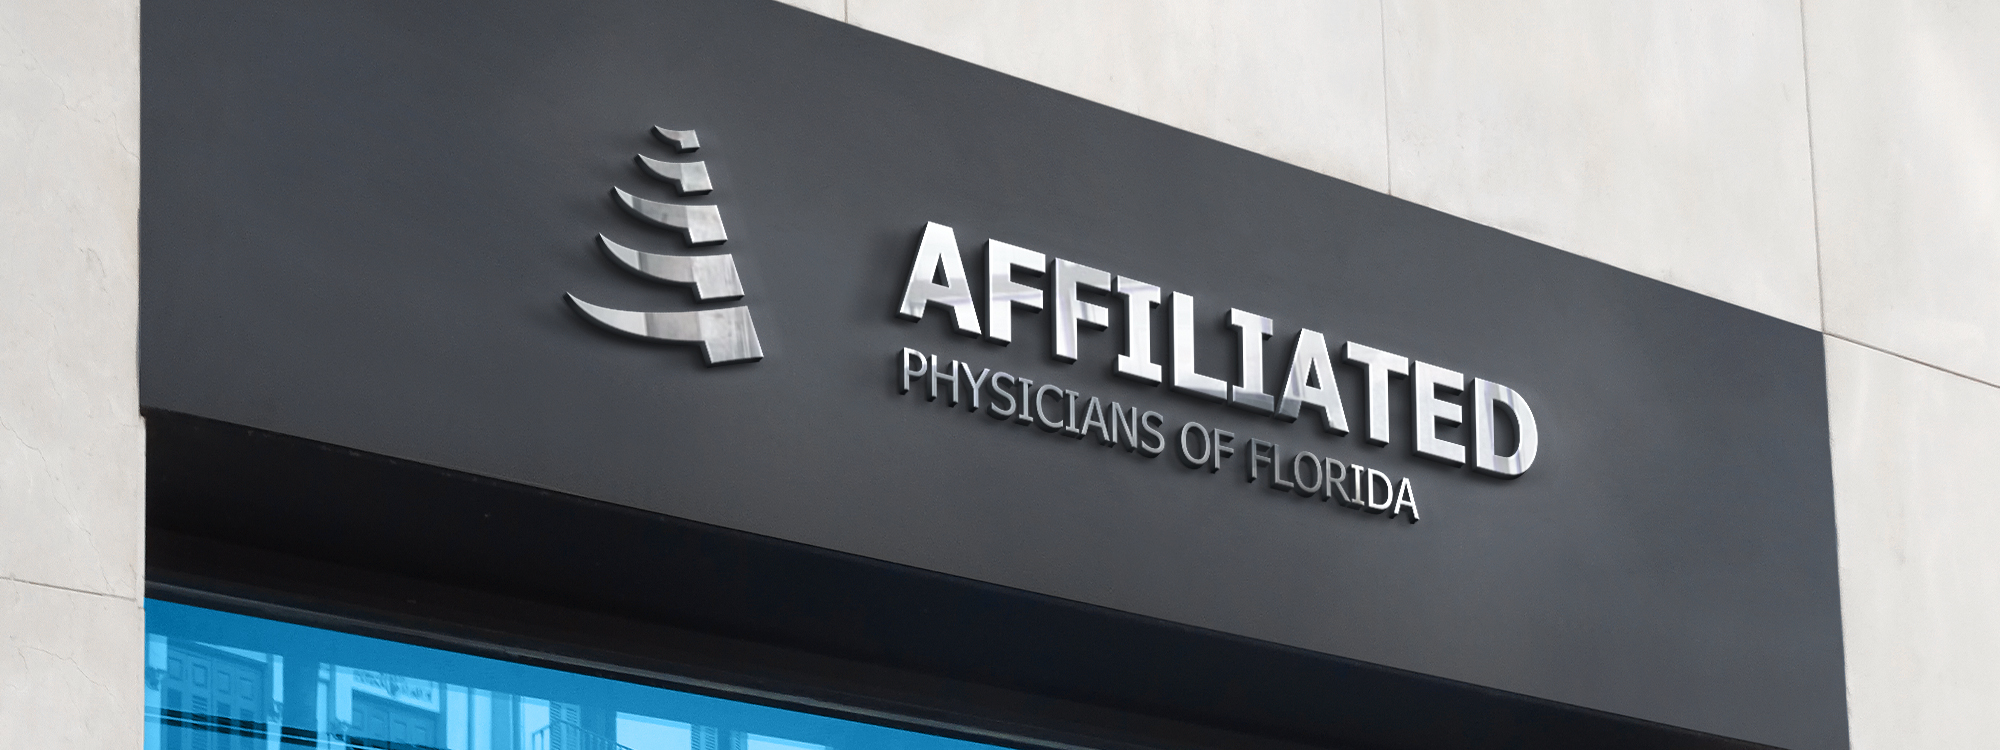 Affiliated Physicians Of Florida Banner 2